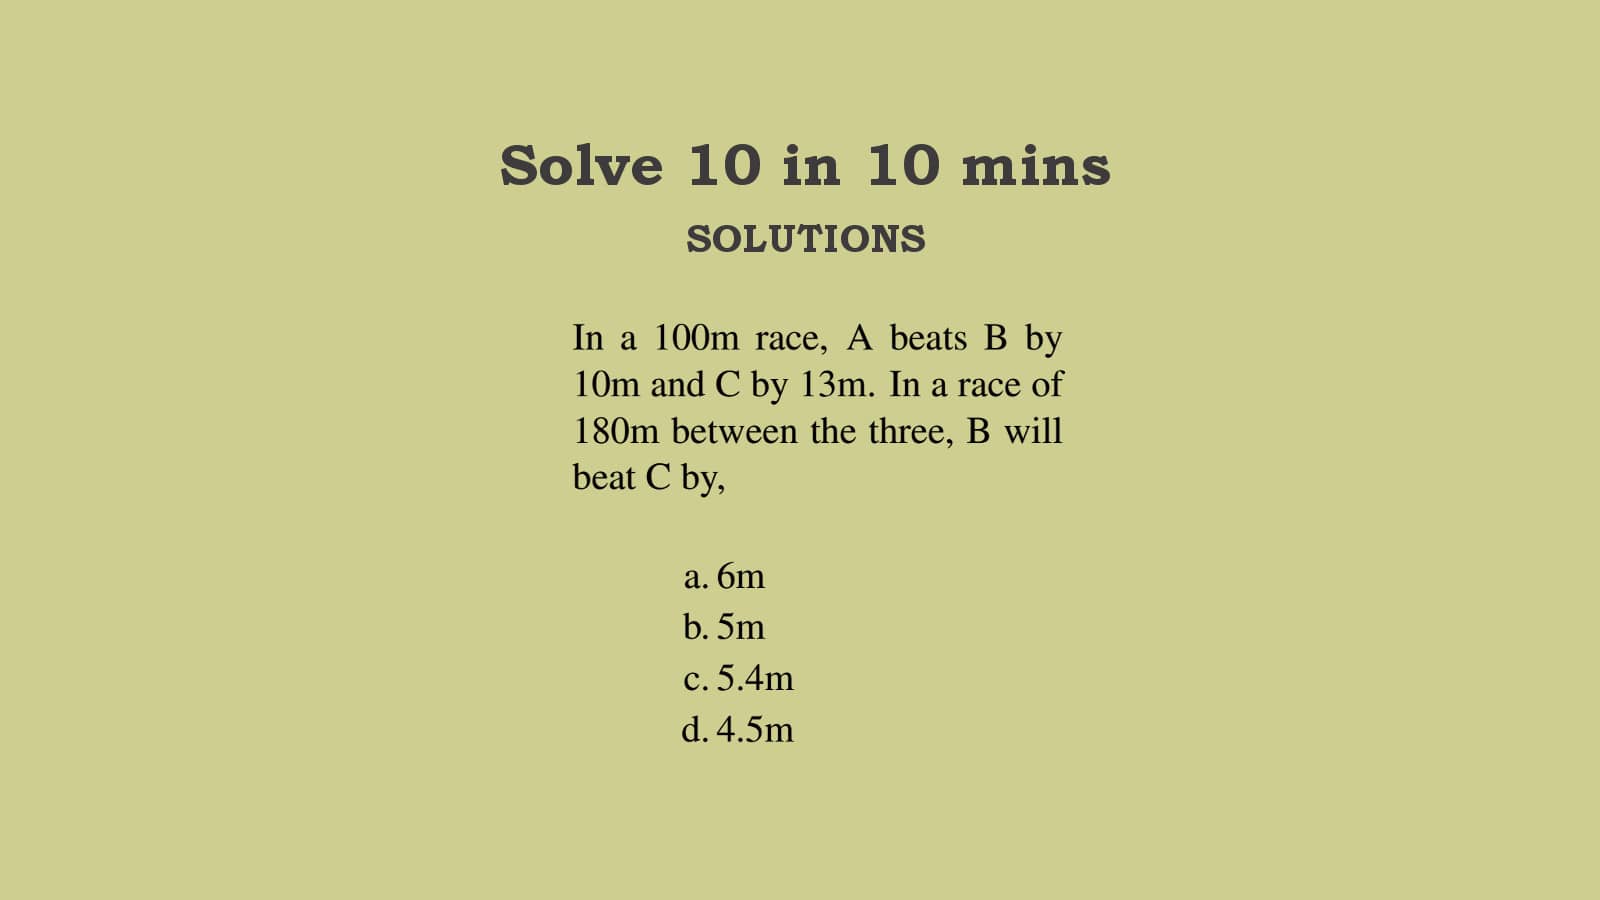 How to Solve WBCS Arithmetic Questions Set 7 Quickly